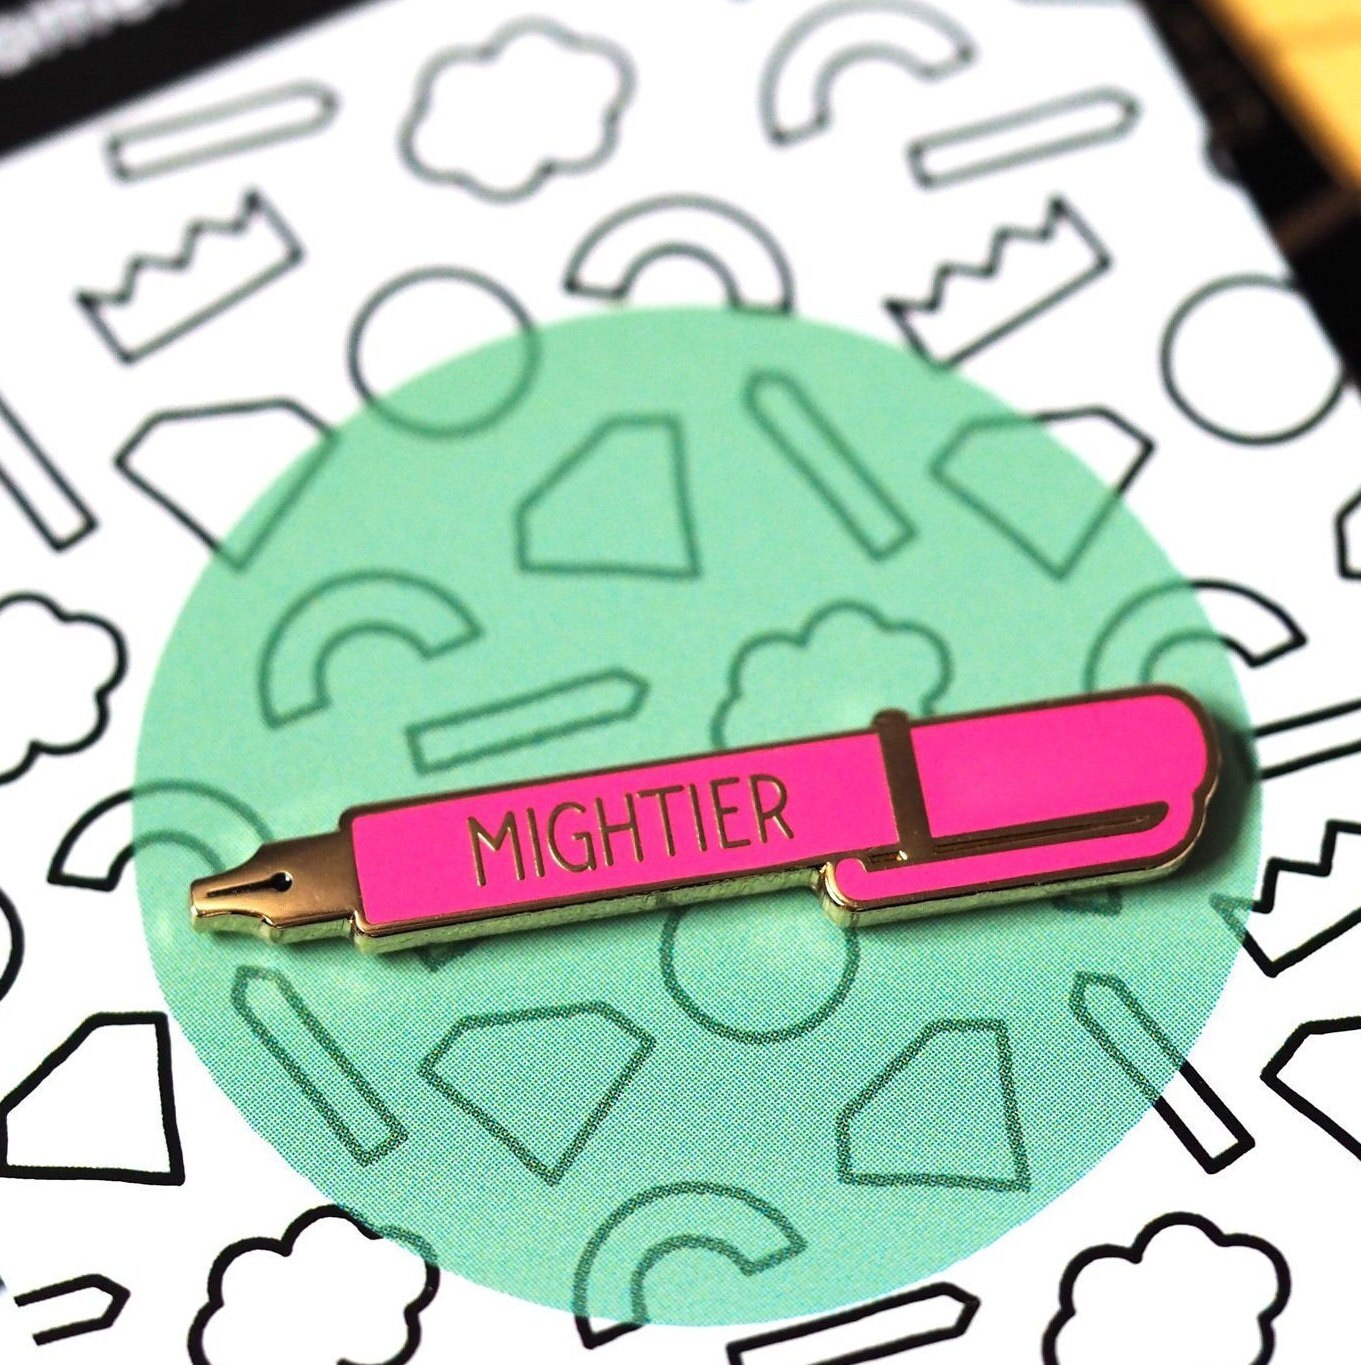 The Pen is Mightier than the Sword Enamel Pin